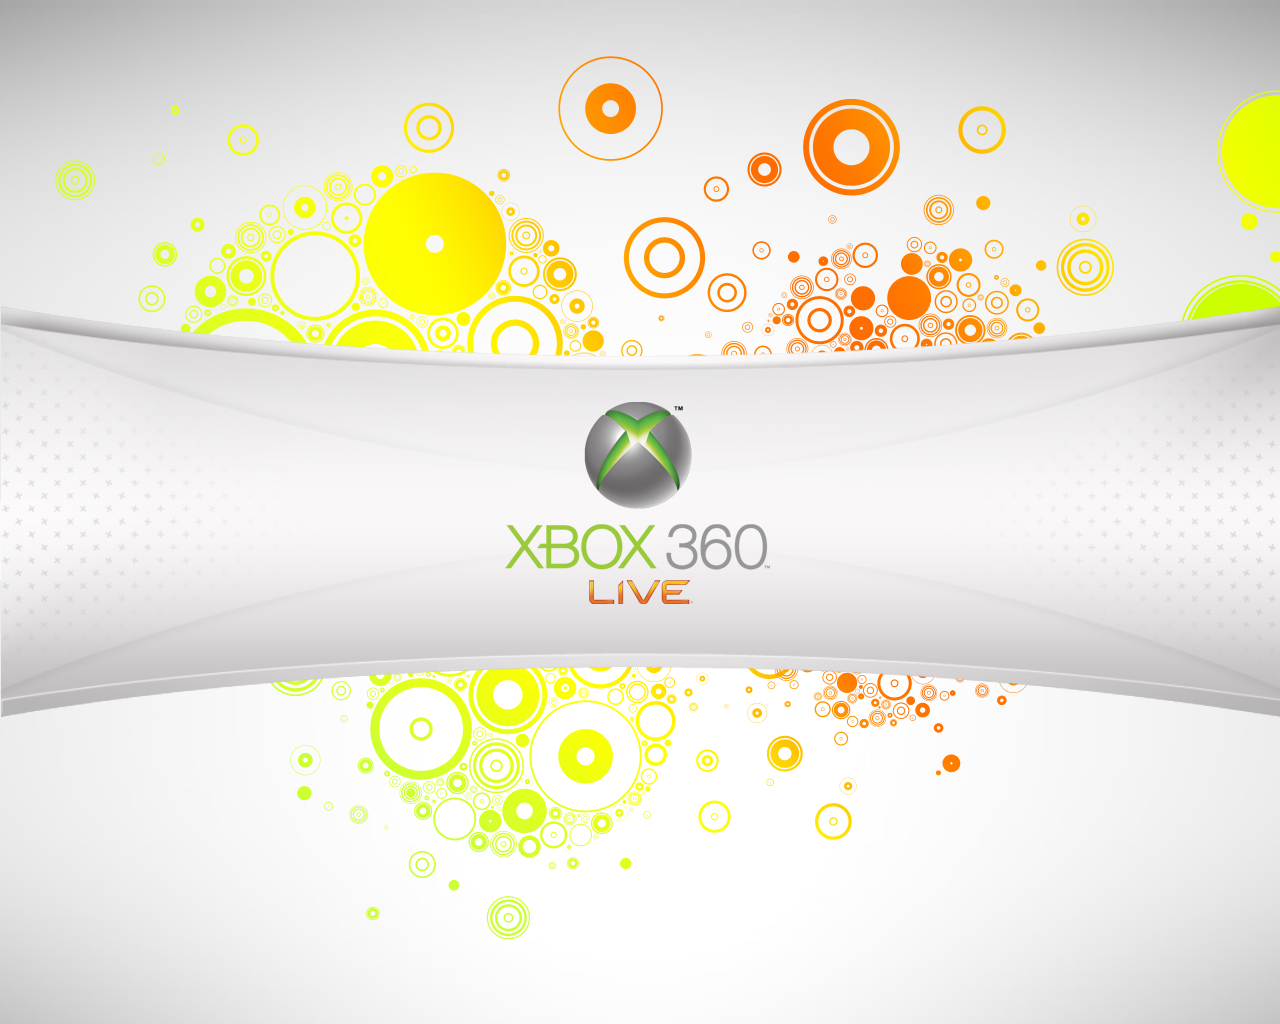  Keeping The Service Safe For Everyone xbox 360 wallpaper 15